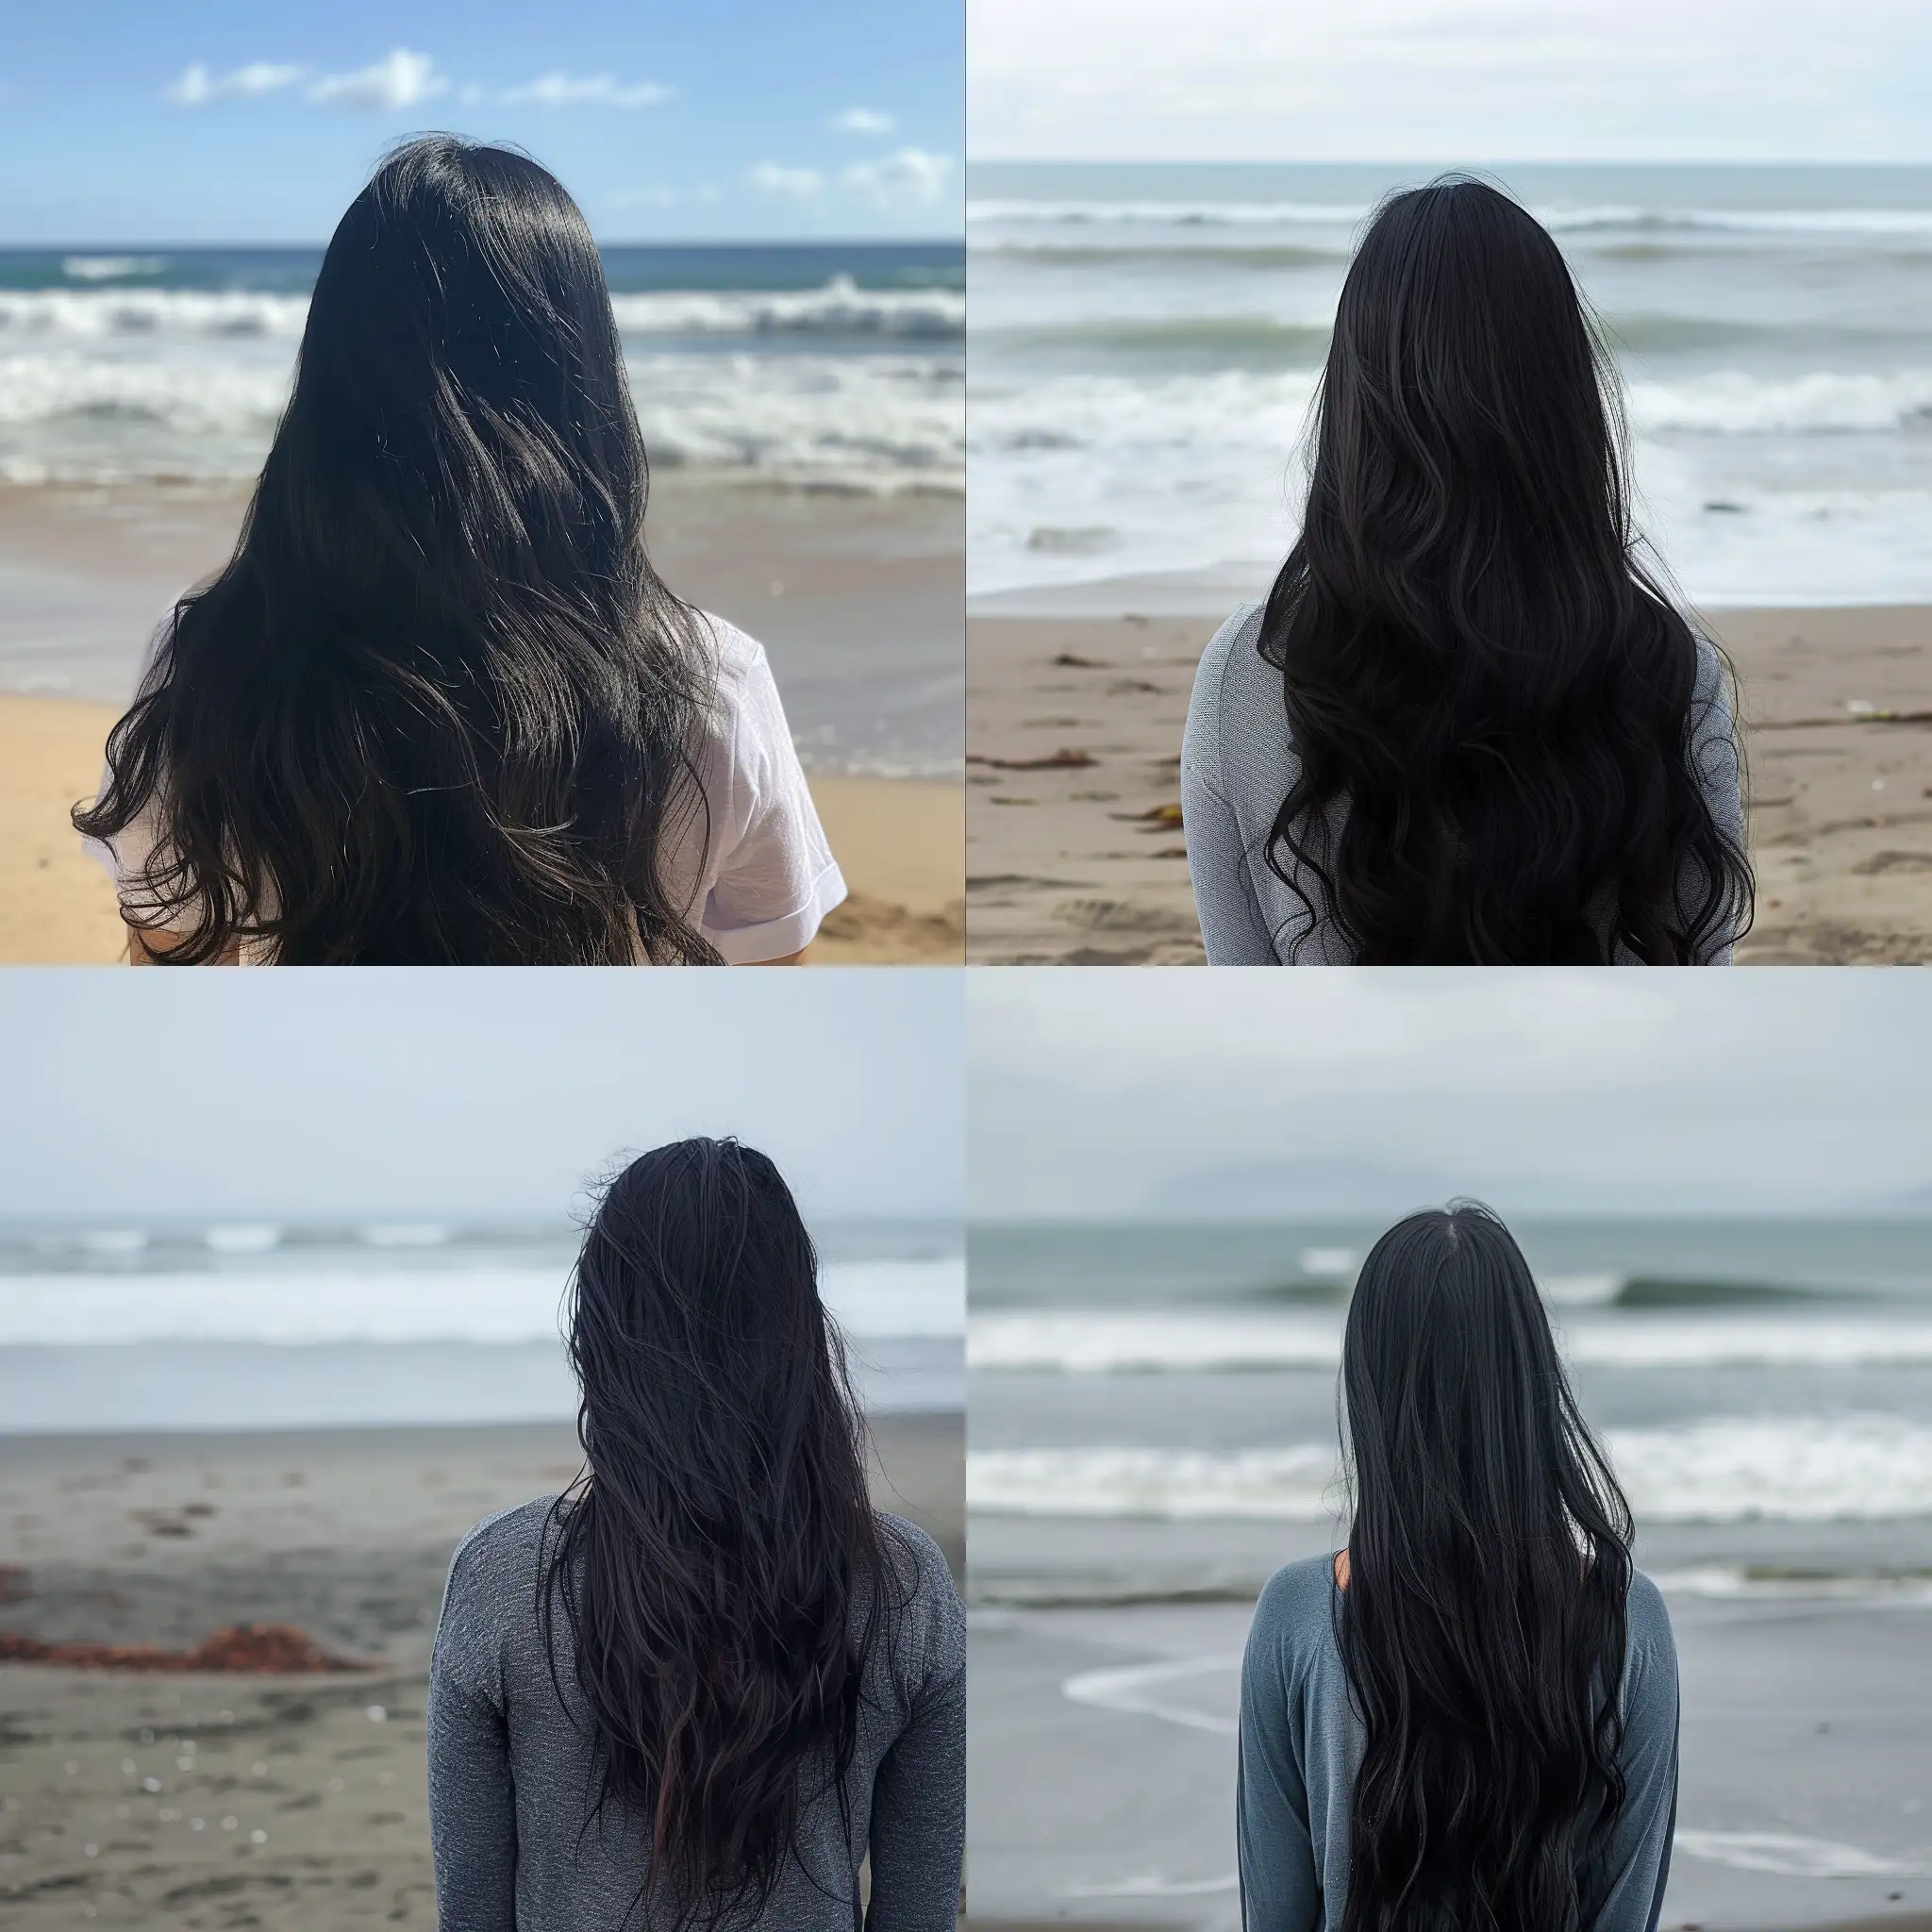 Girl with long black hair facing away on a beach looking at the ocean 